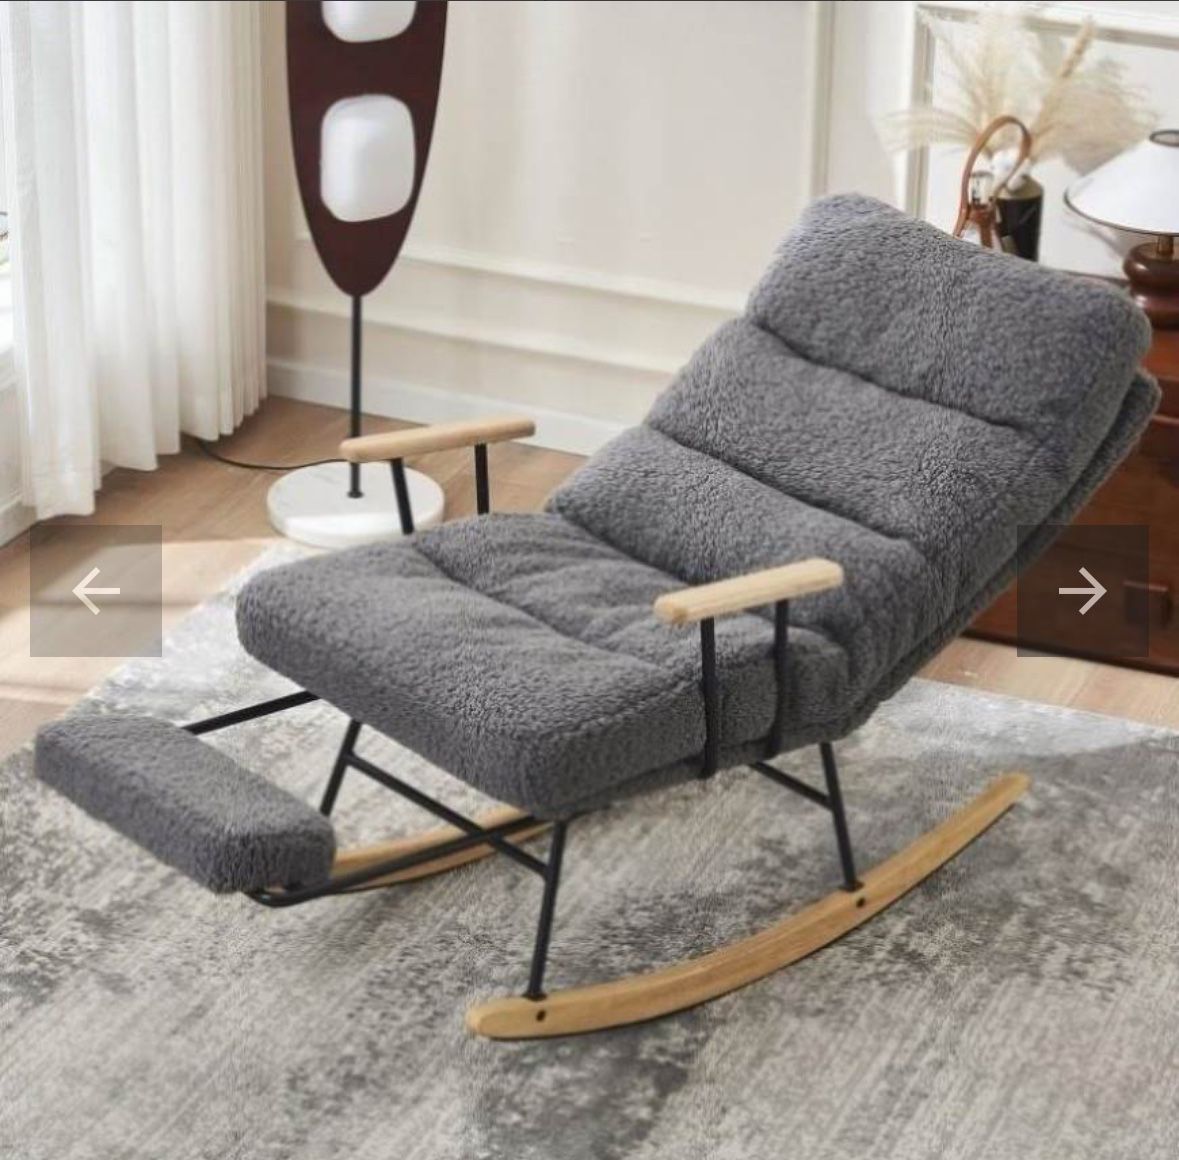 Modern Teddy Gliding Rocking Chair With High Back, Retractable Footrest, And Adjustable Back Angle G-25